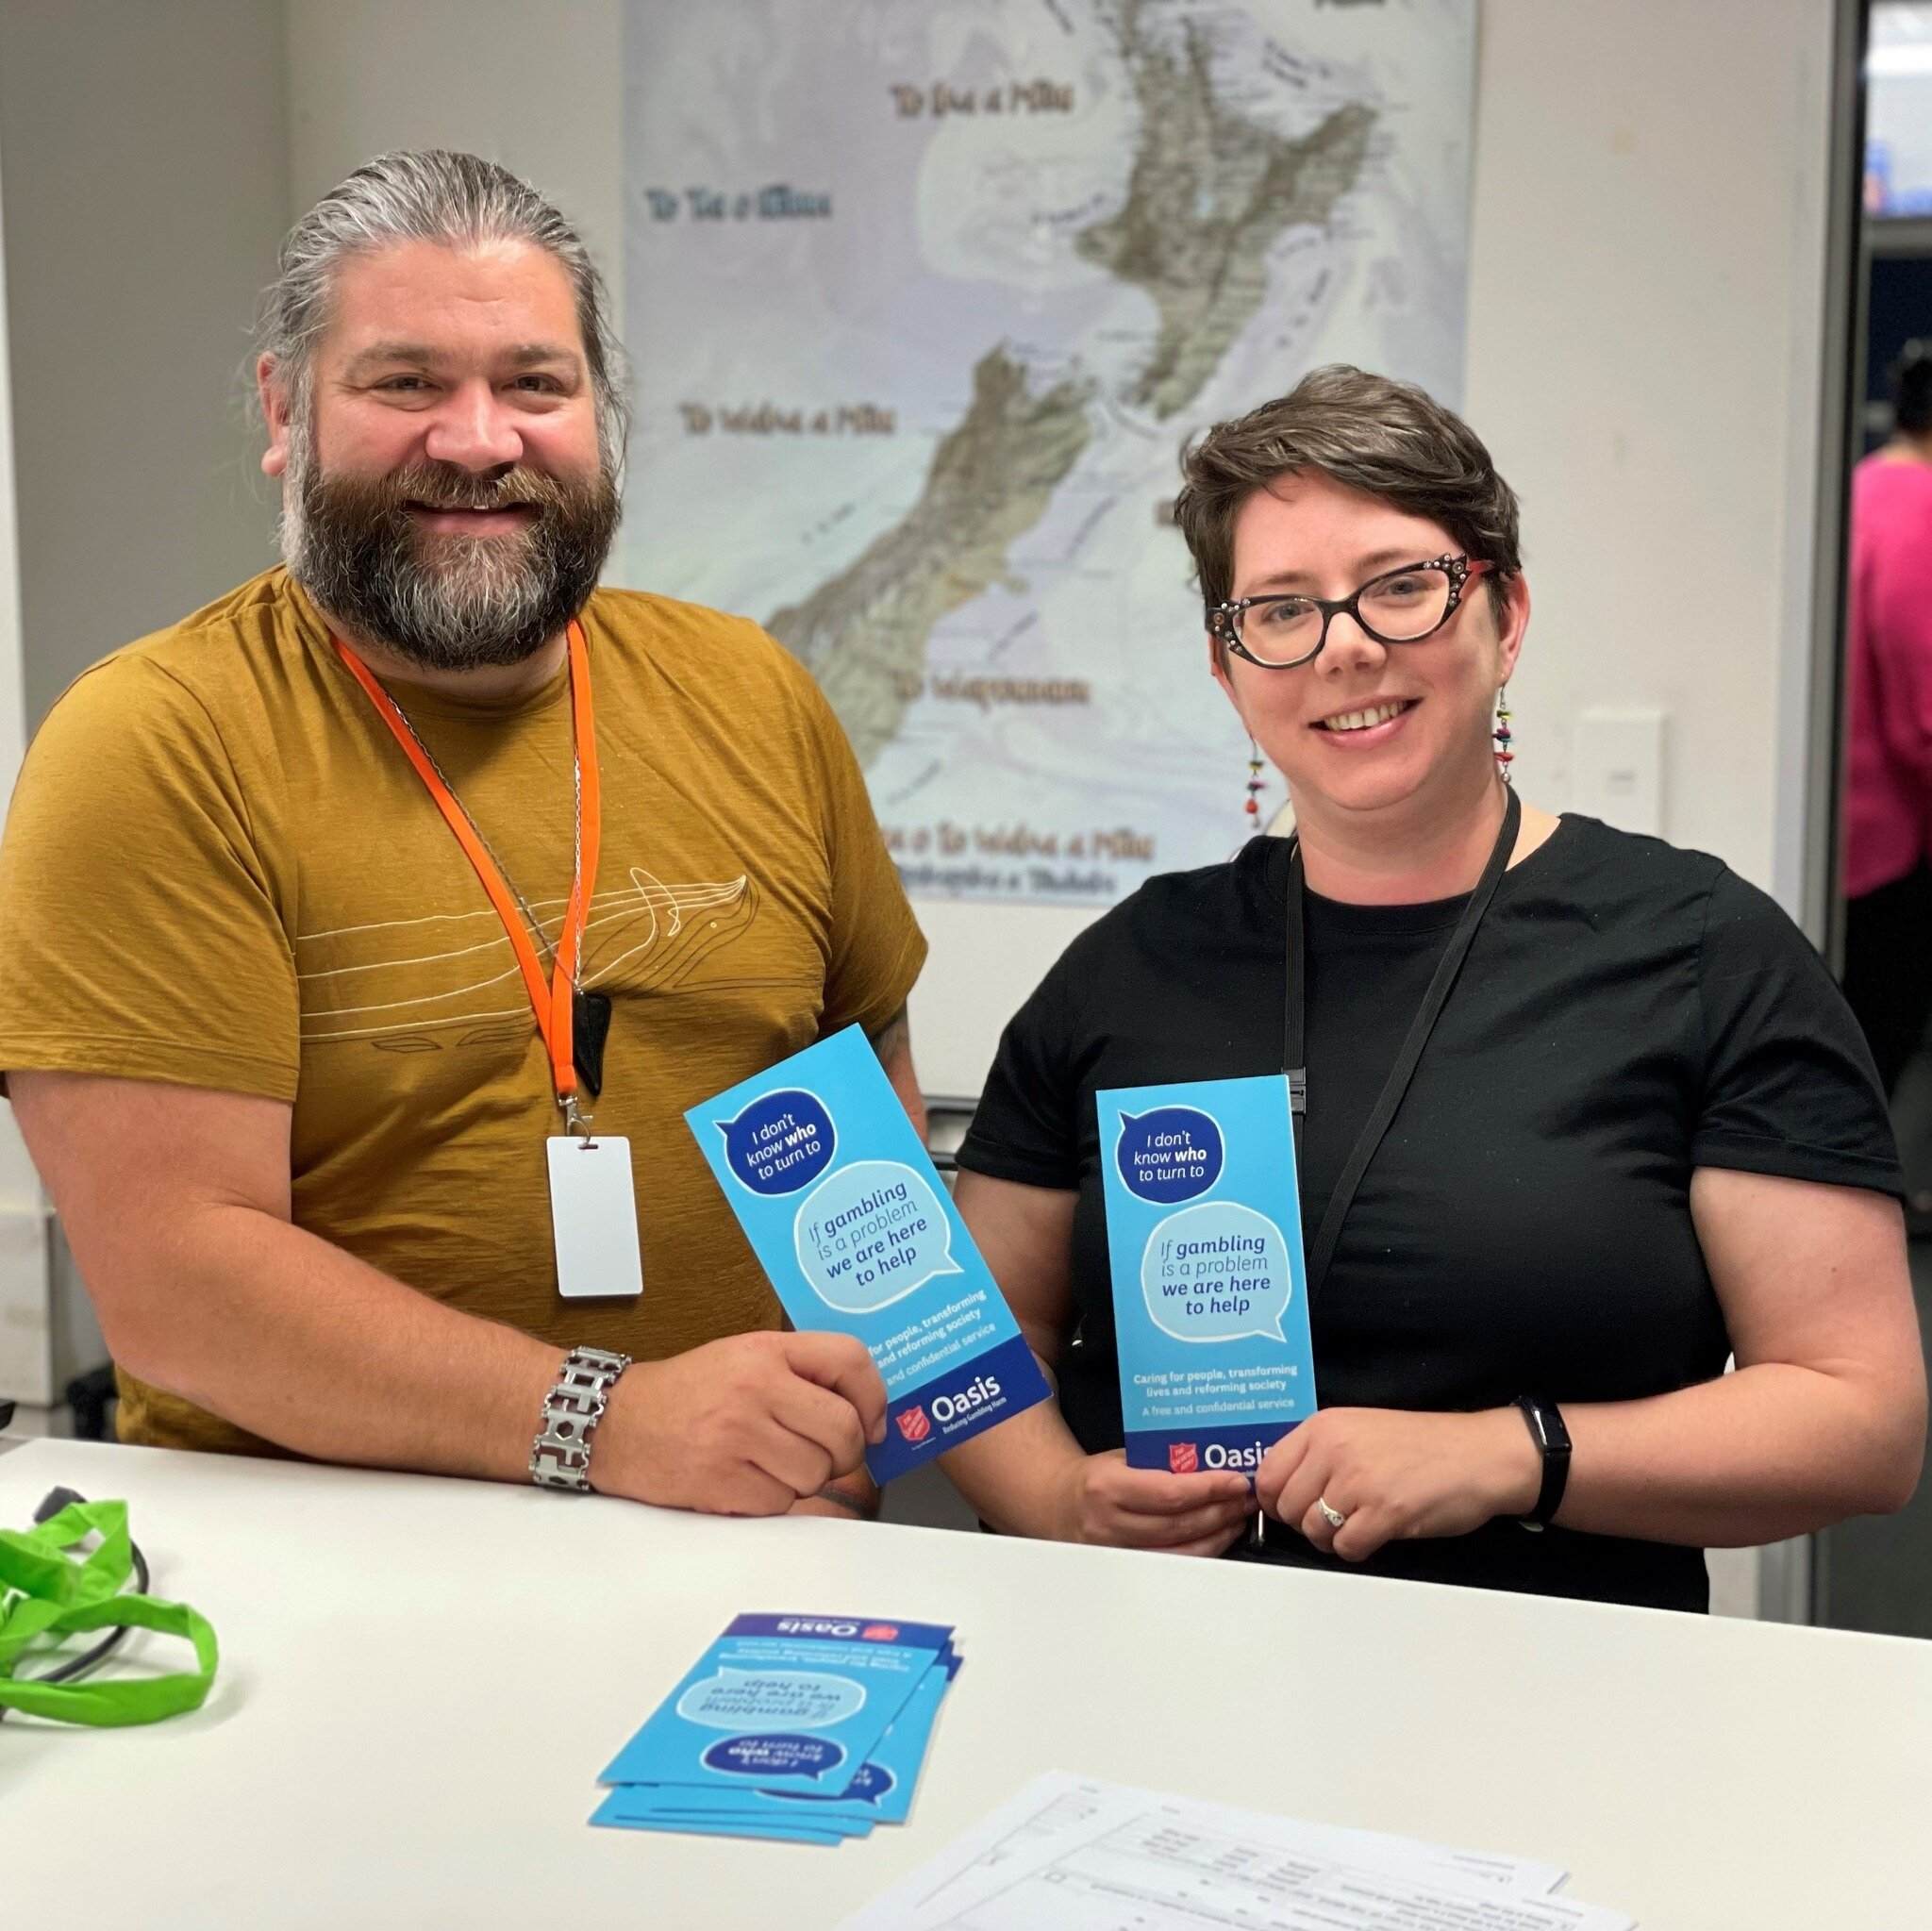 Recently DCM hosted The Salvation Army Oasis - Reducing Gambling Harm NZ, a service that offers harm reduction support for problem gambling during our own Te Awatea harm reduction programme that runs every Monday and Friday. DCM often partners with o